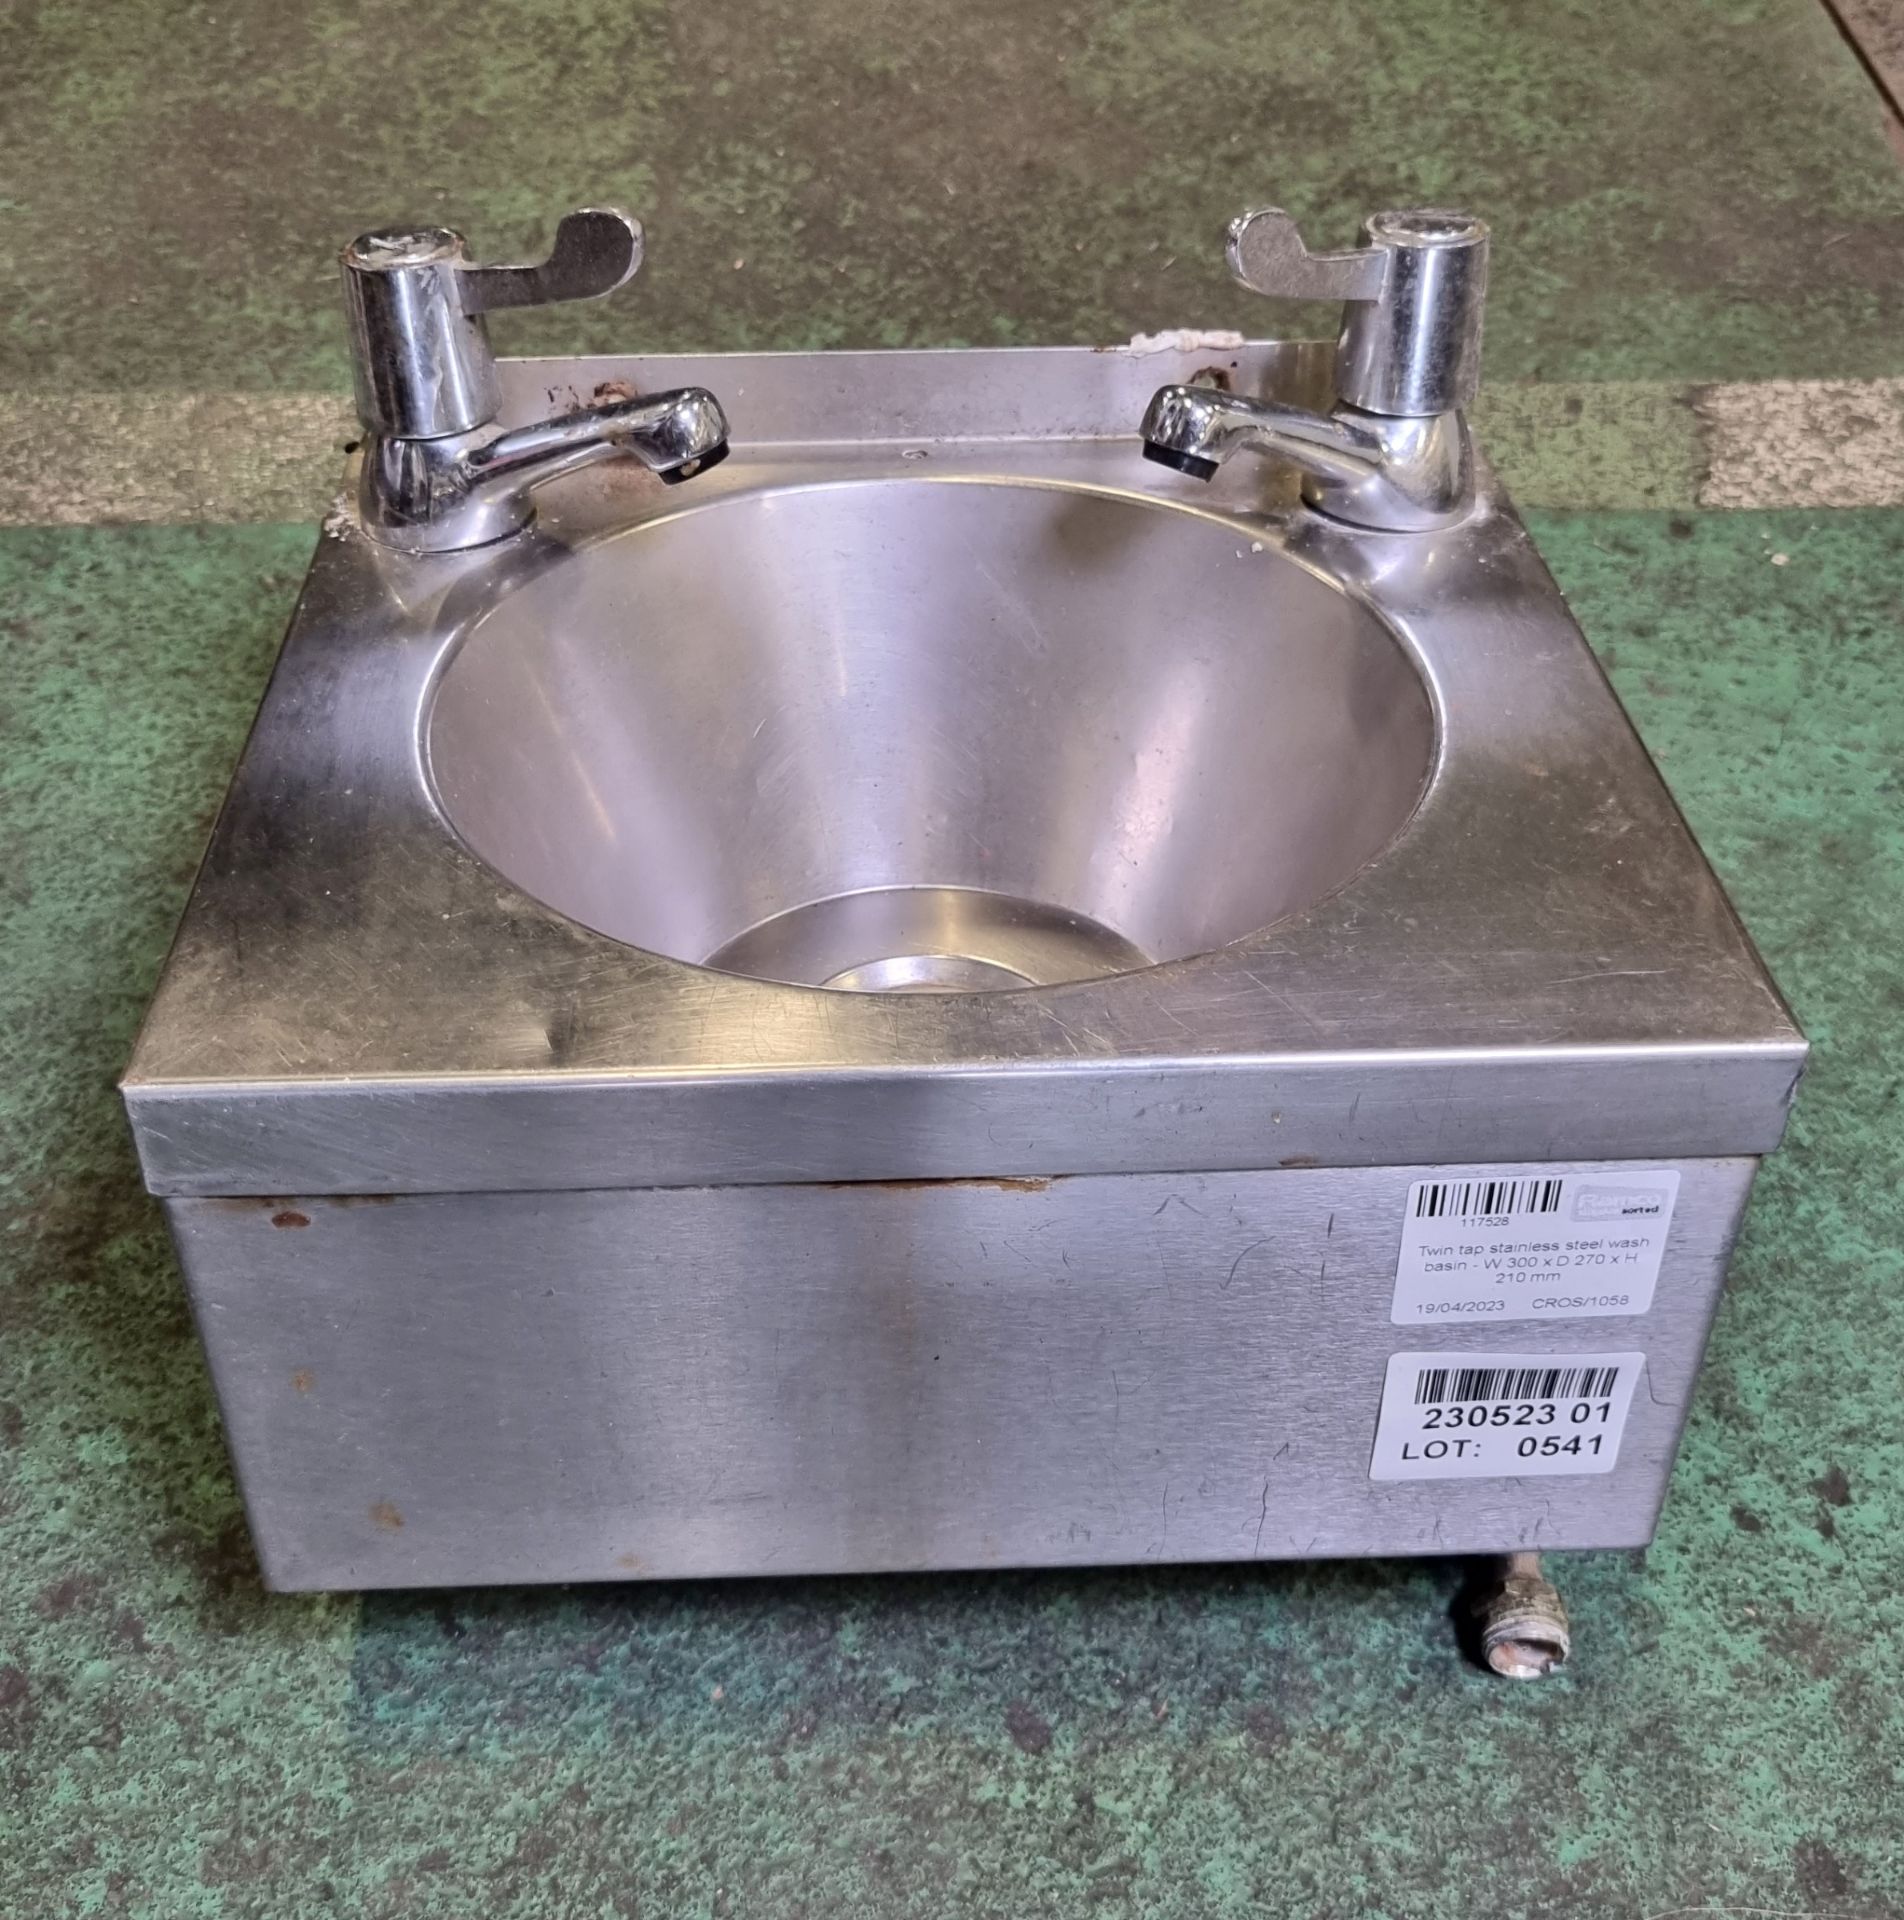 Twin tap stainless steel wash basin - W 300 x D 270 x H 210 mm